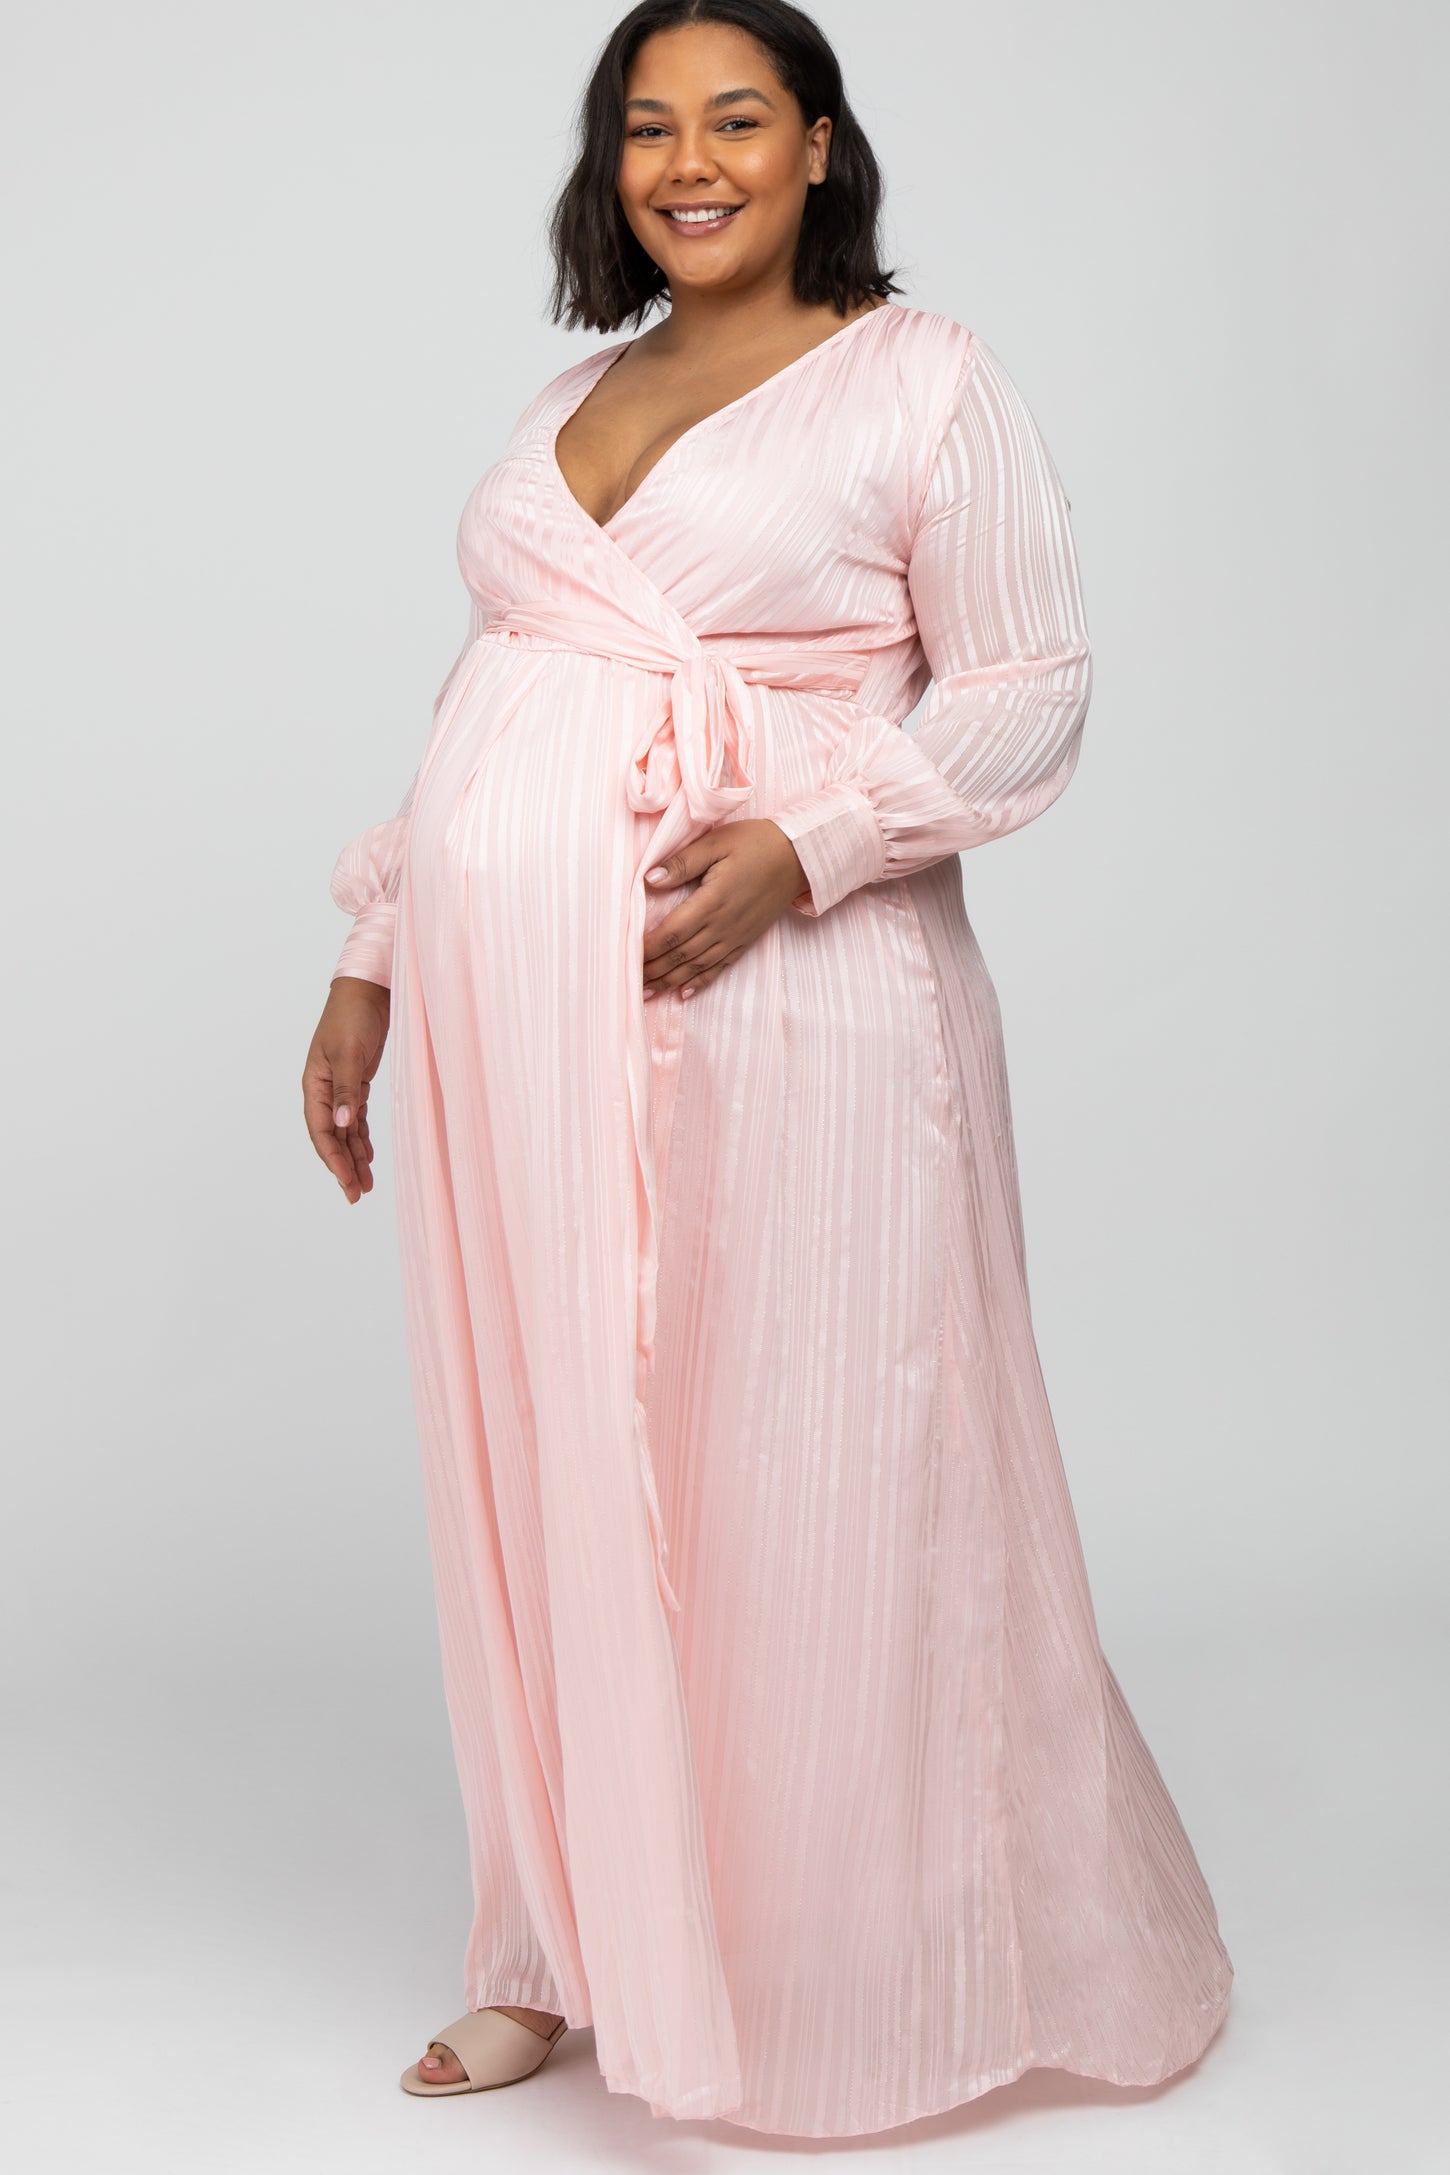 18+ Pink Sparkly Maternity Dress